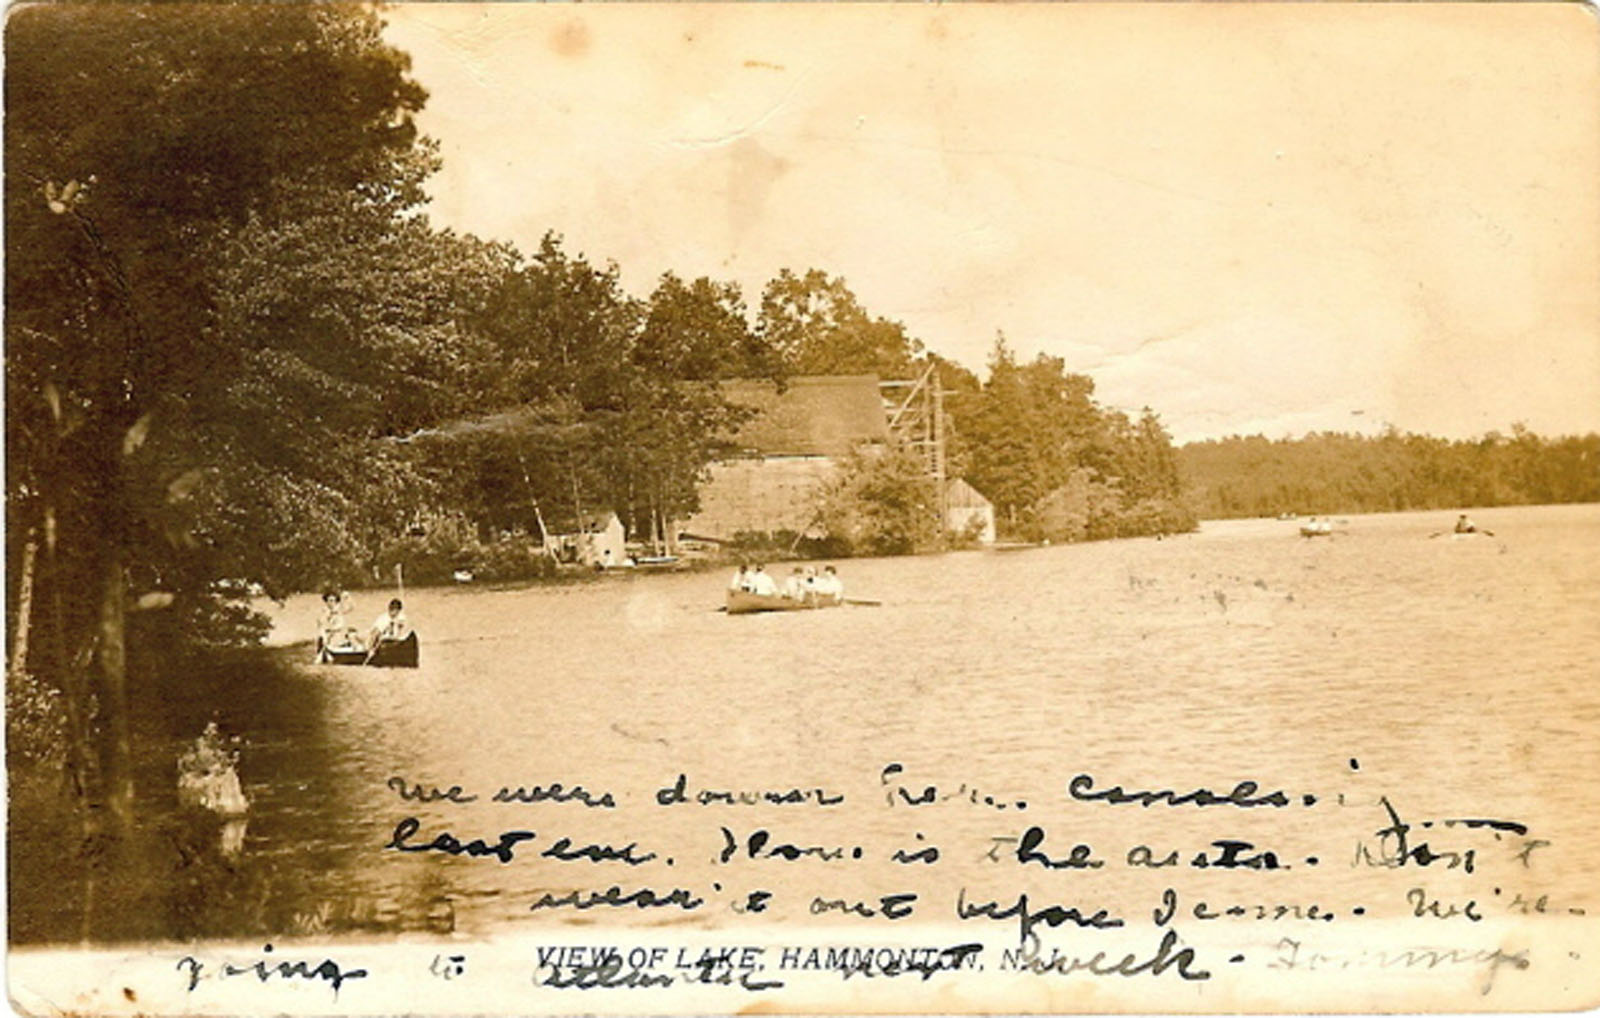 Hammonton - A view of Hammonton Lake - Published by G Randal Swan - 1910